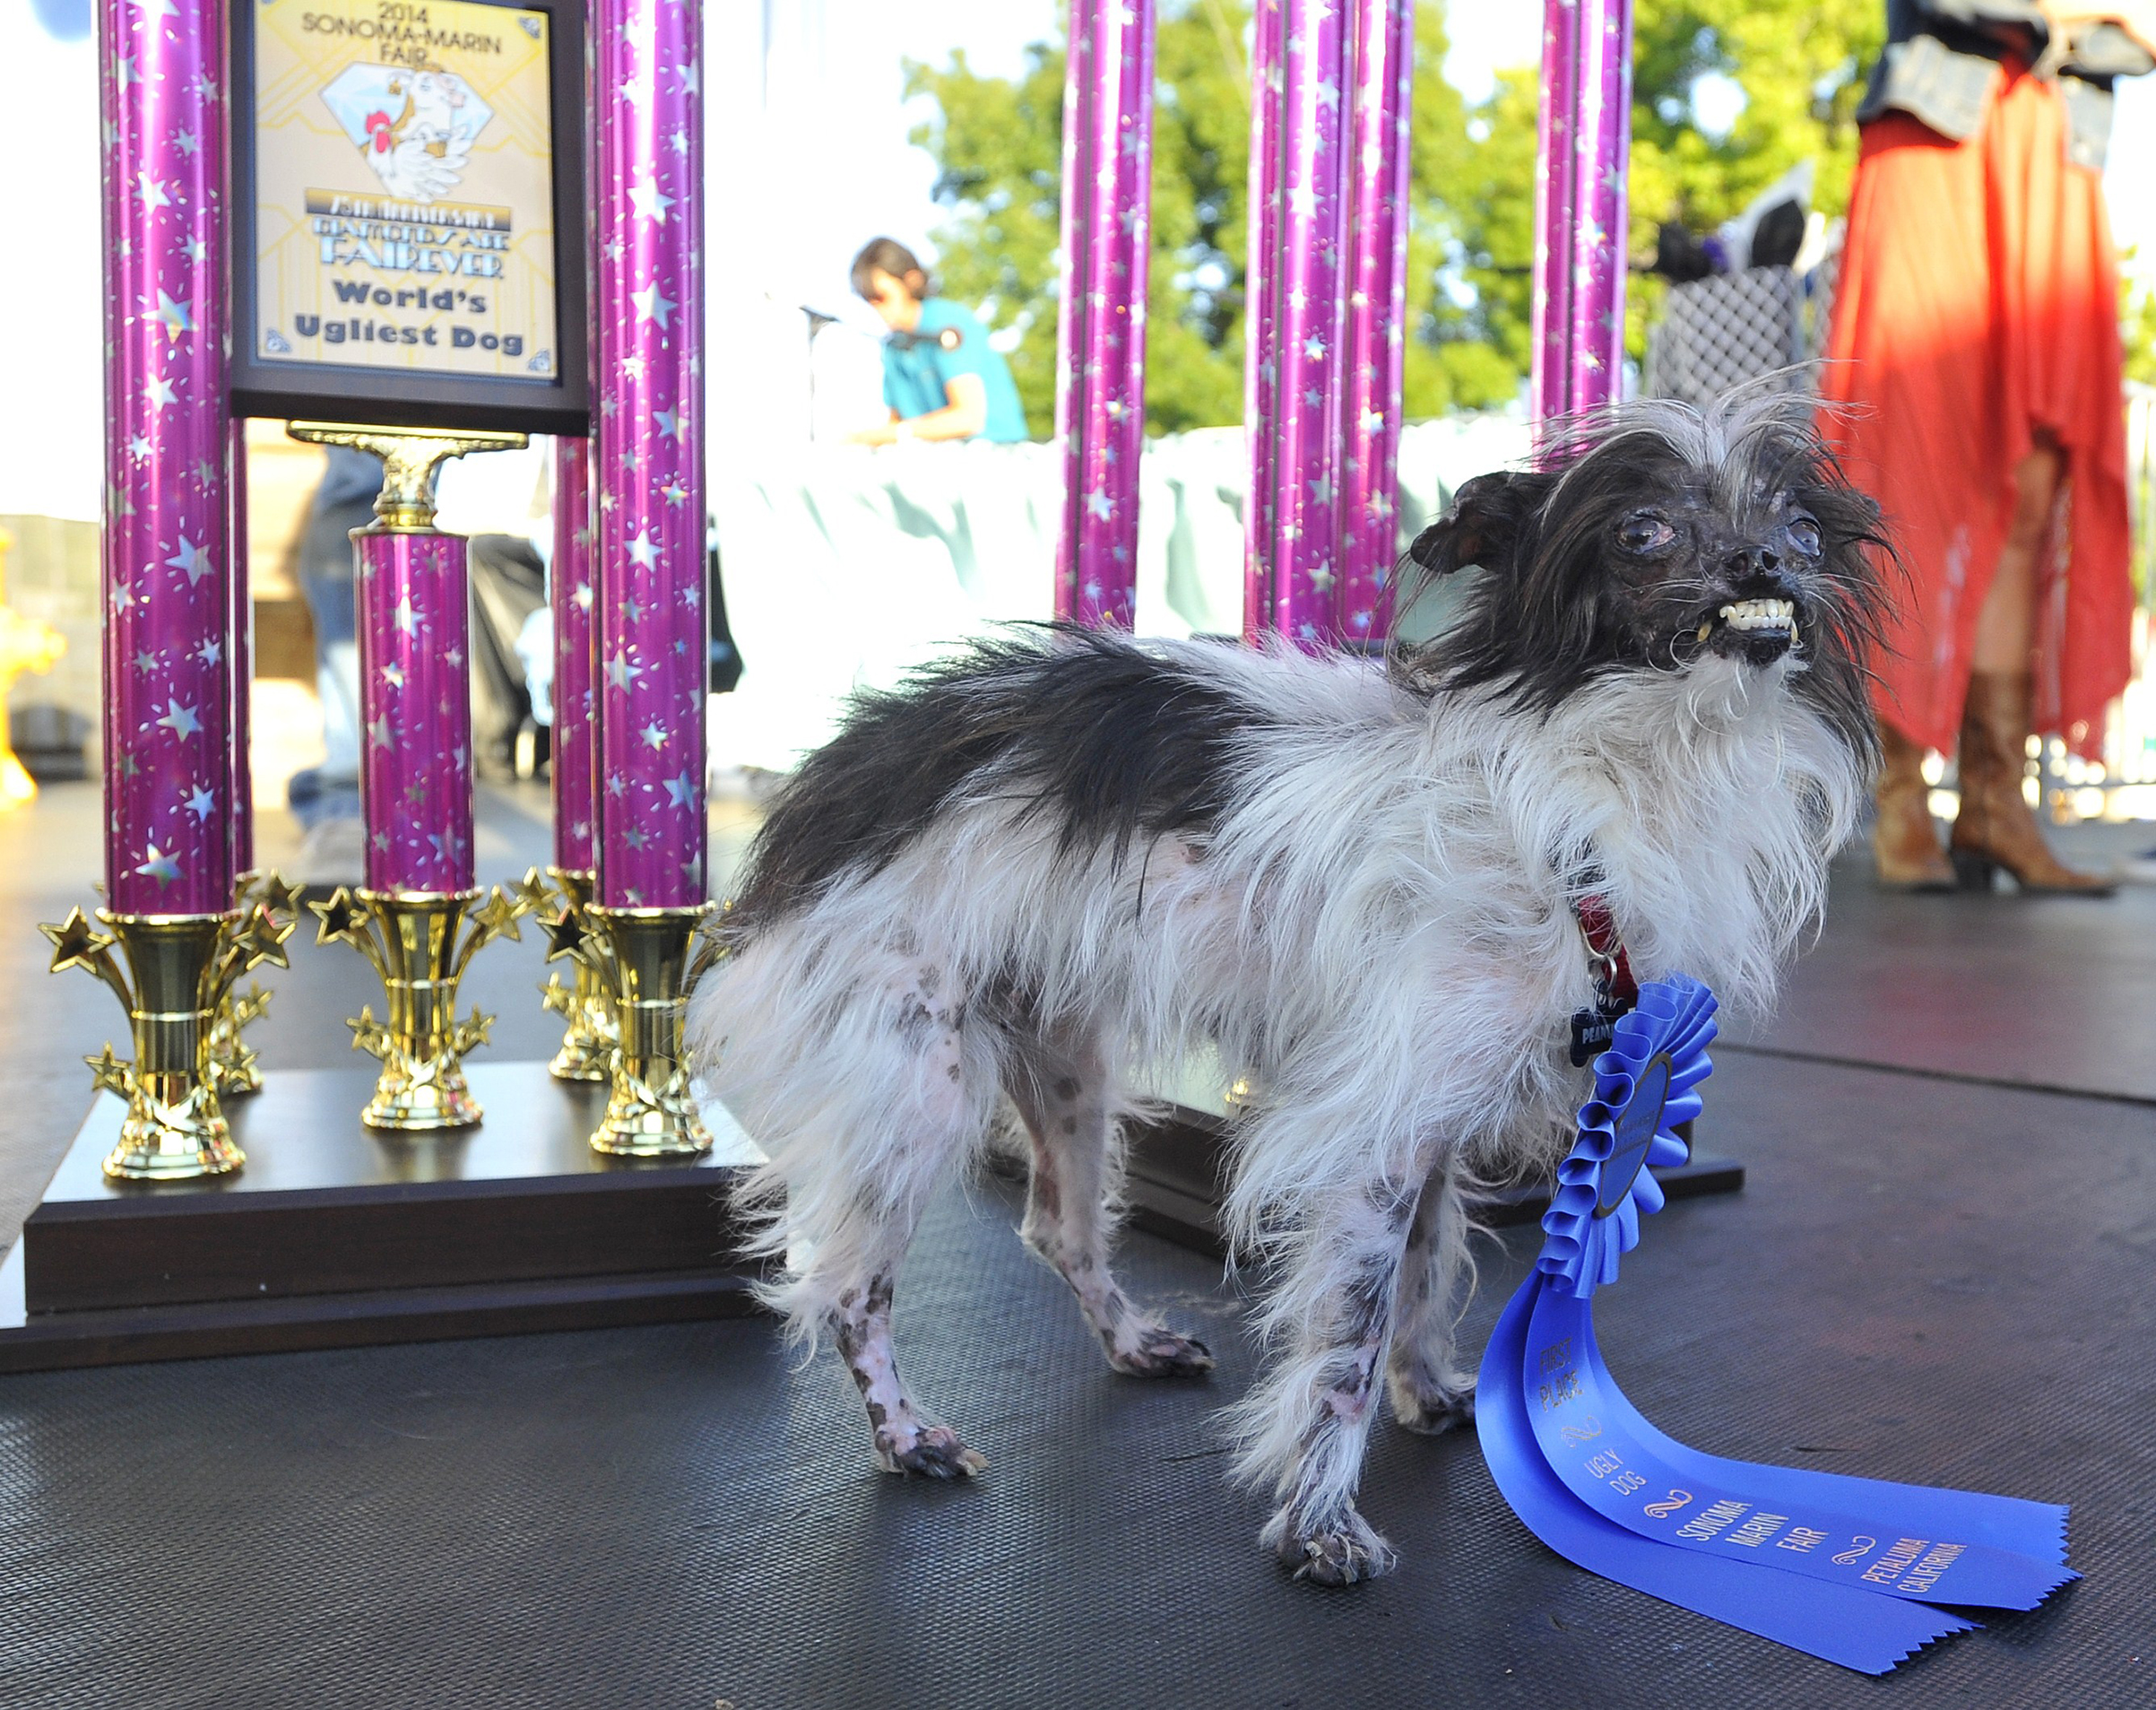 Peanut, a mutt who is suspected of being a Chihuahua-Shitzu mix, stands near a trophy after winning The World's Ugliest Dog Competition in Petaluma, Calif. on June 20, 2014.